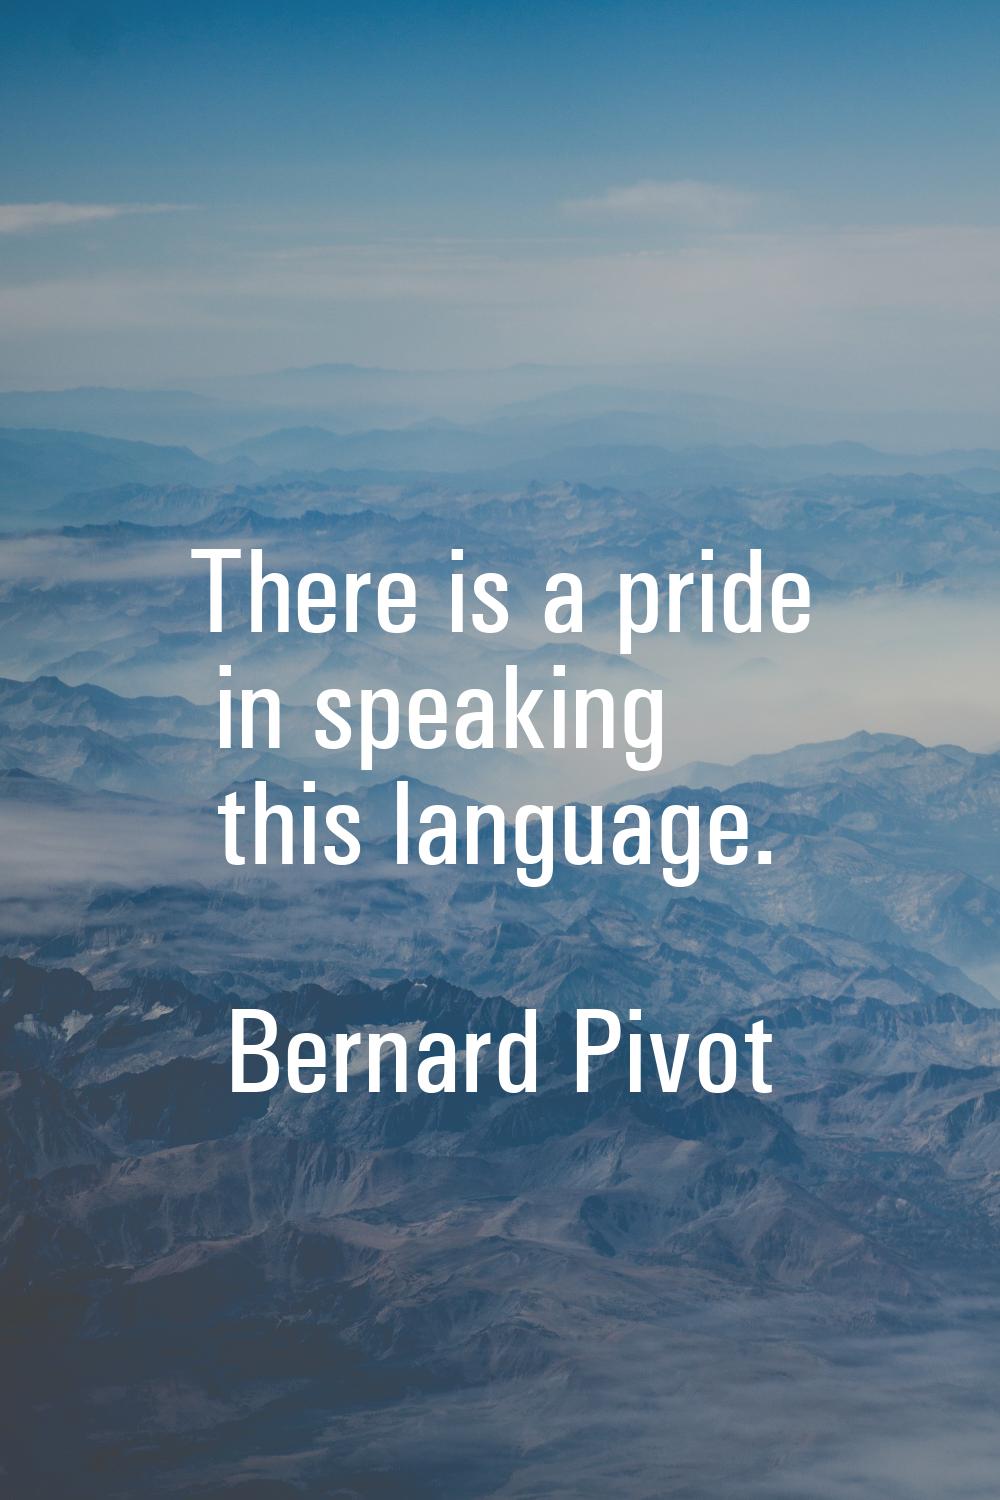 There is a pride in speaking this language.